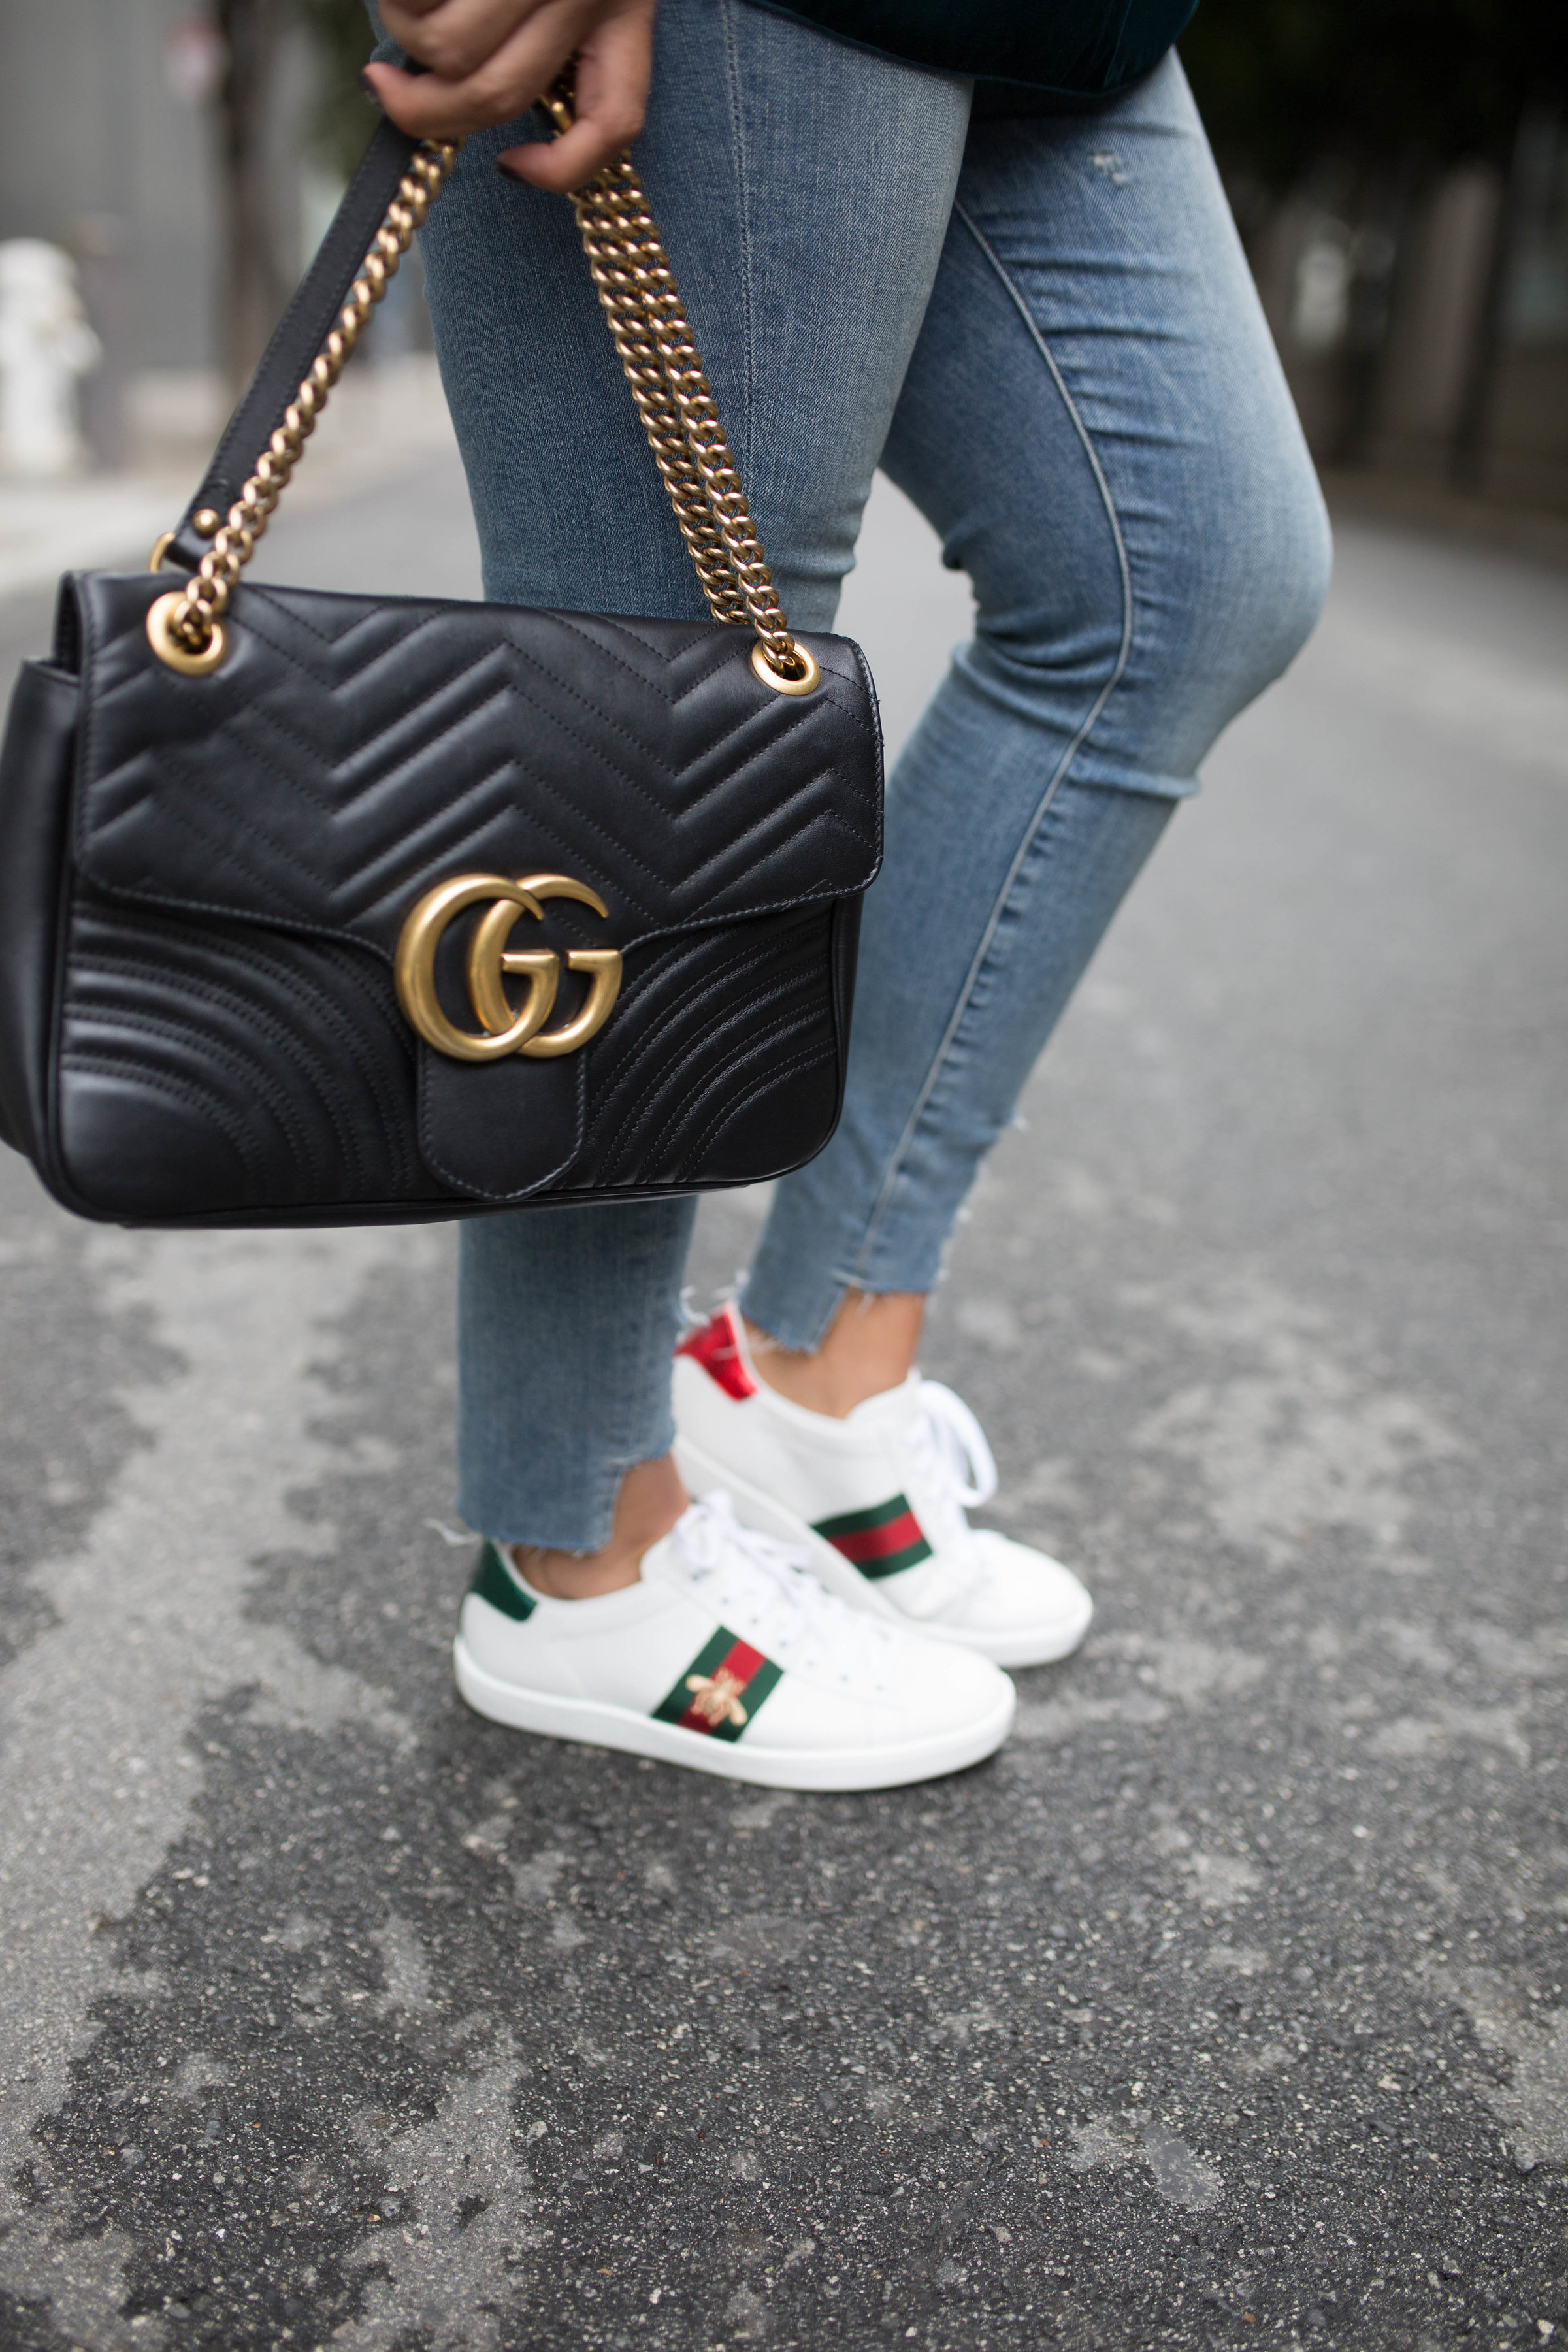 How to Clean Gucci Sneakers (or any 